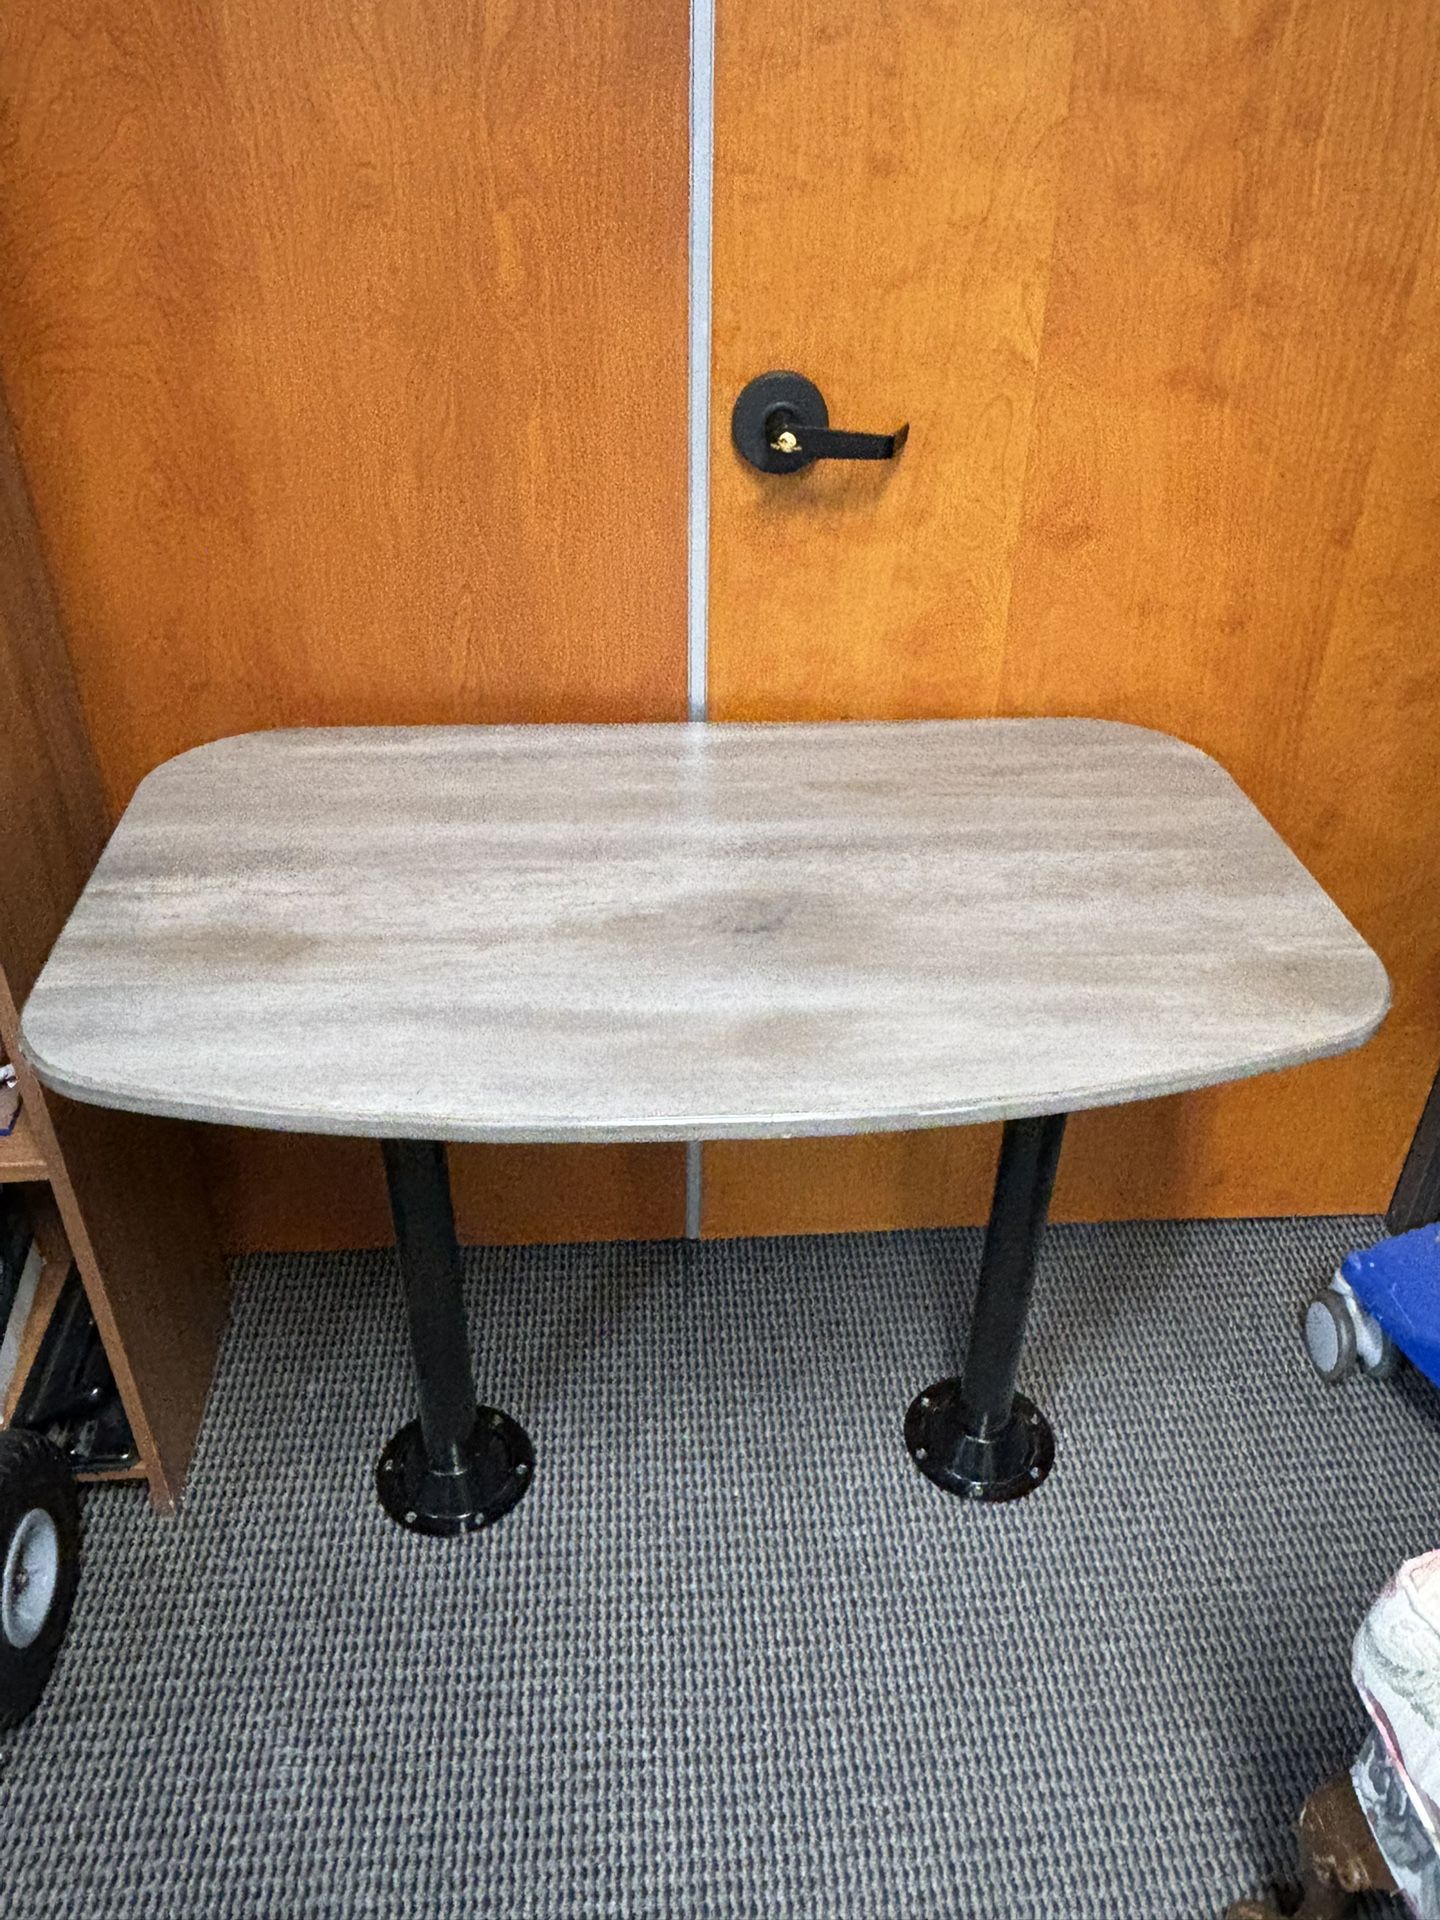 Van Or RV Removable Table